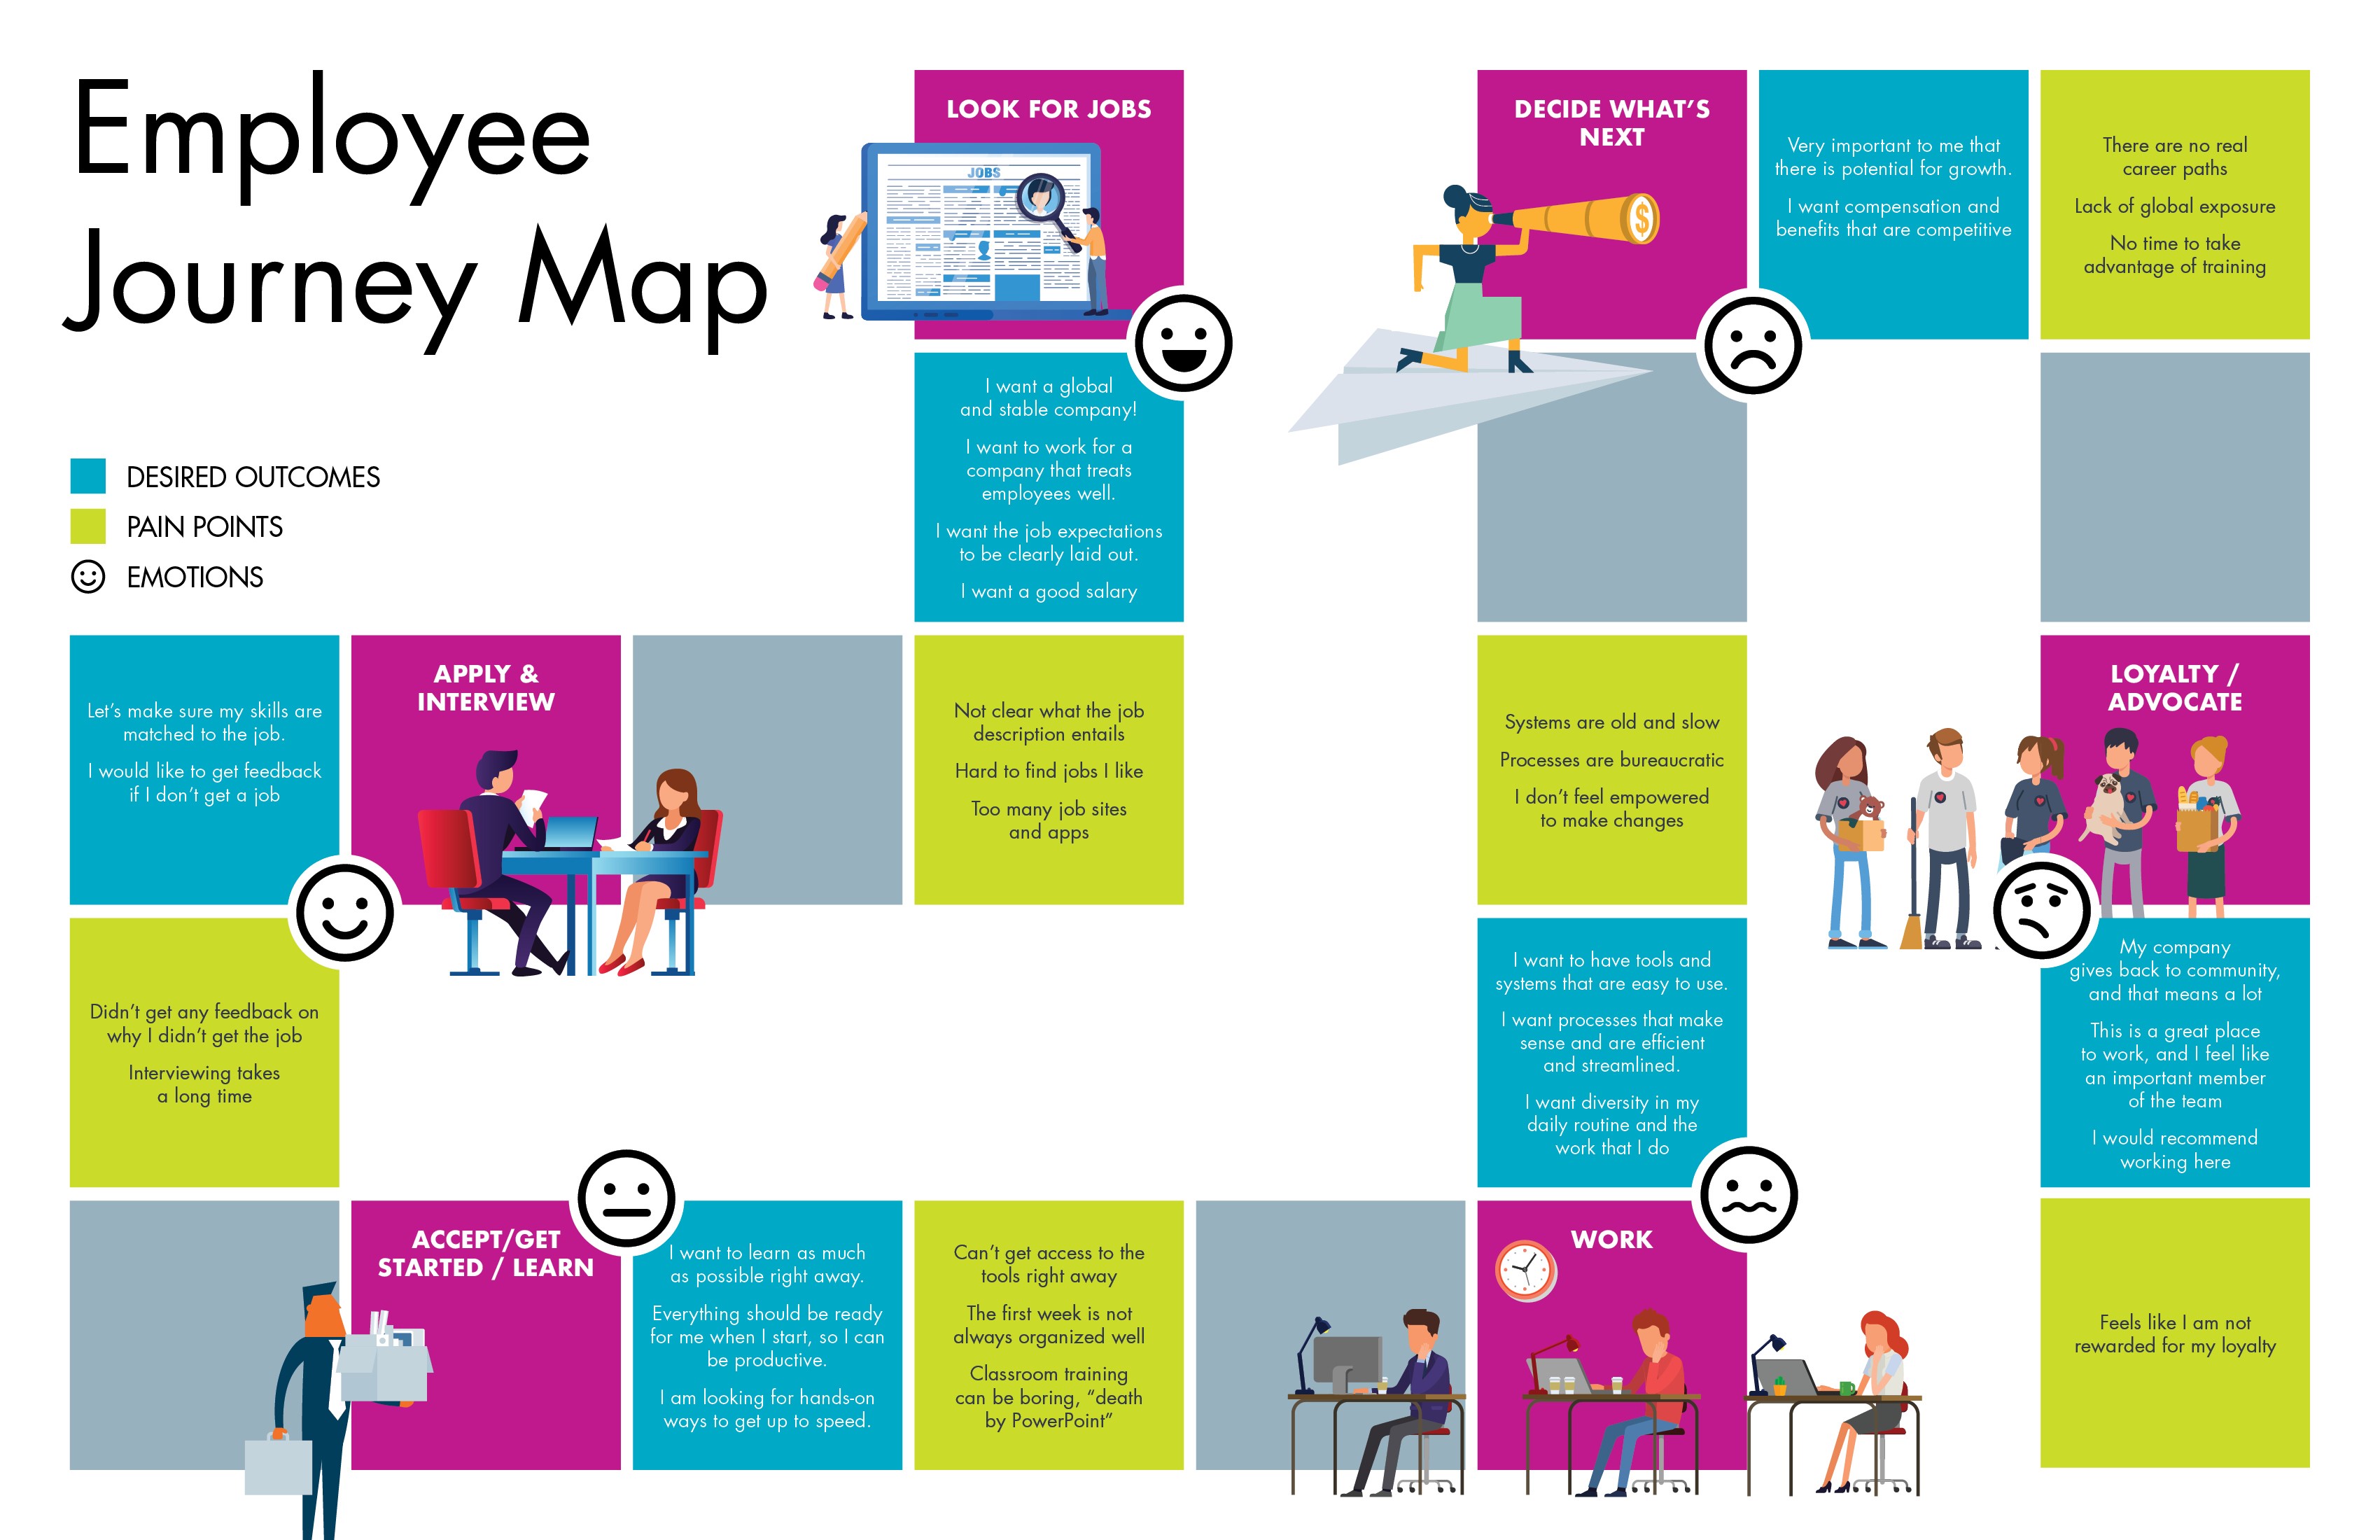 employee journey in a company sample